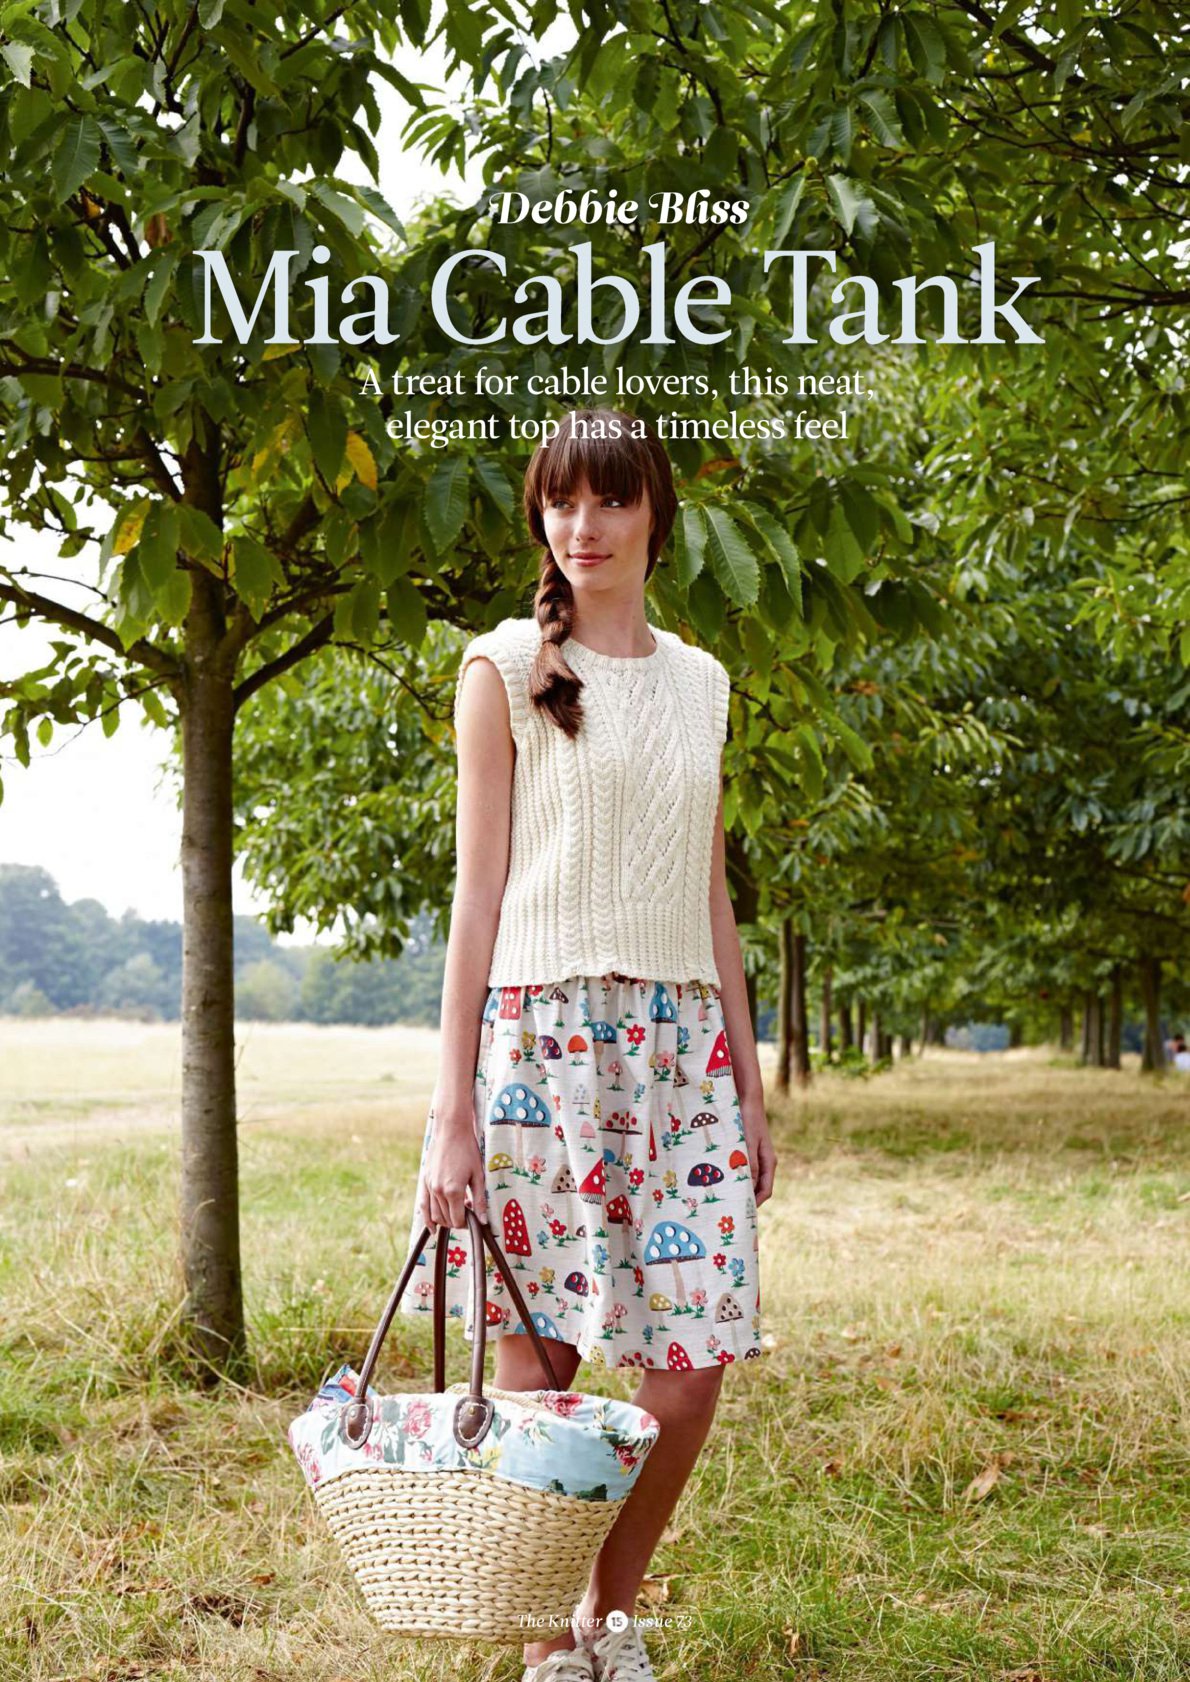 http://vjazhi.ru/images/stories/The_knitter/73/Mia_cable.jpg